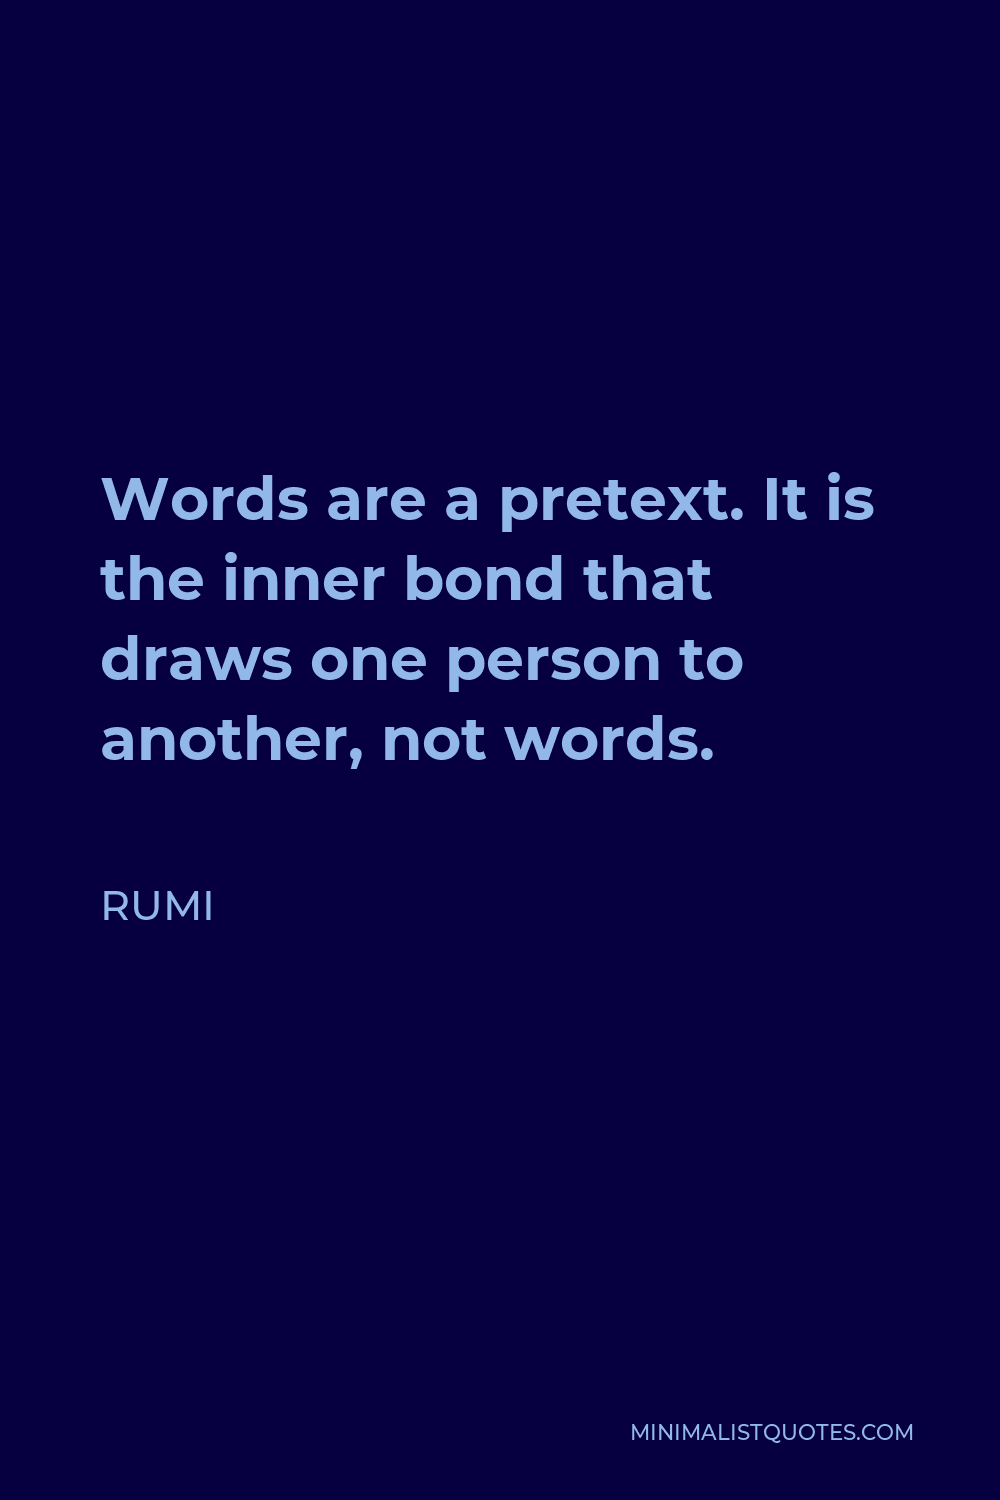 Rumi Quote - Words are a pretext. It is the inner bond that draws one person to another, not words.